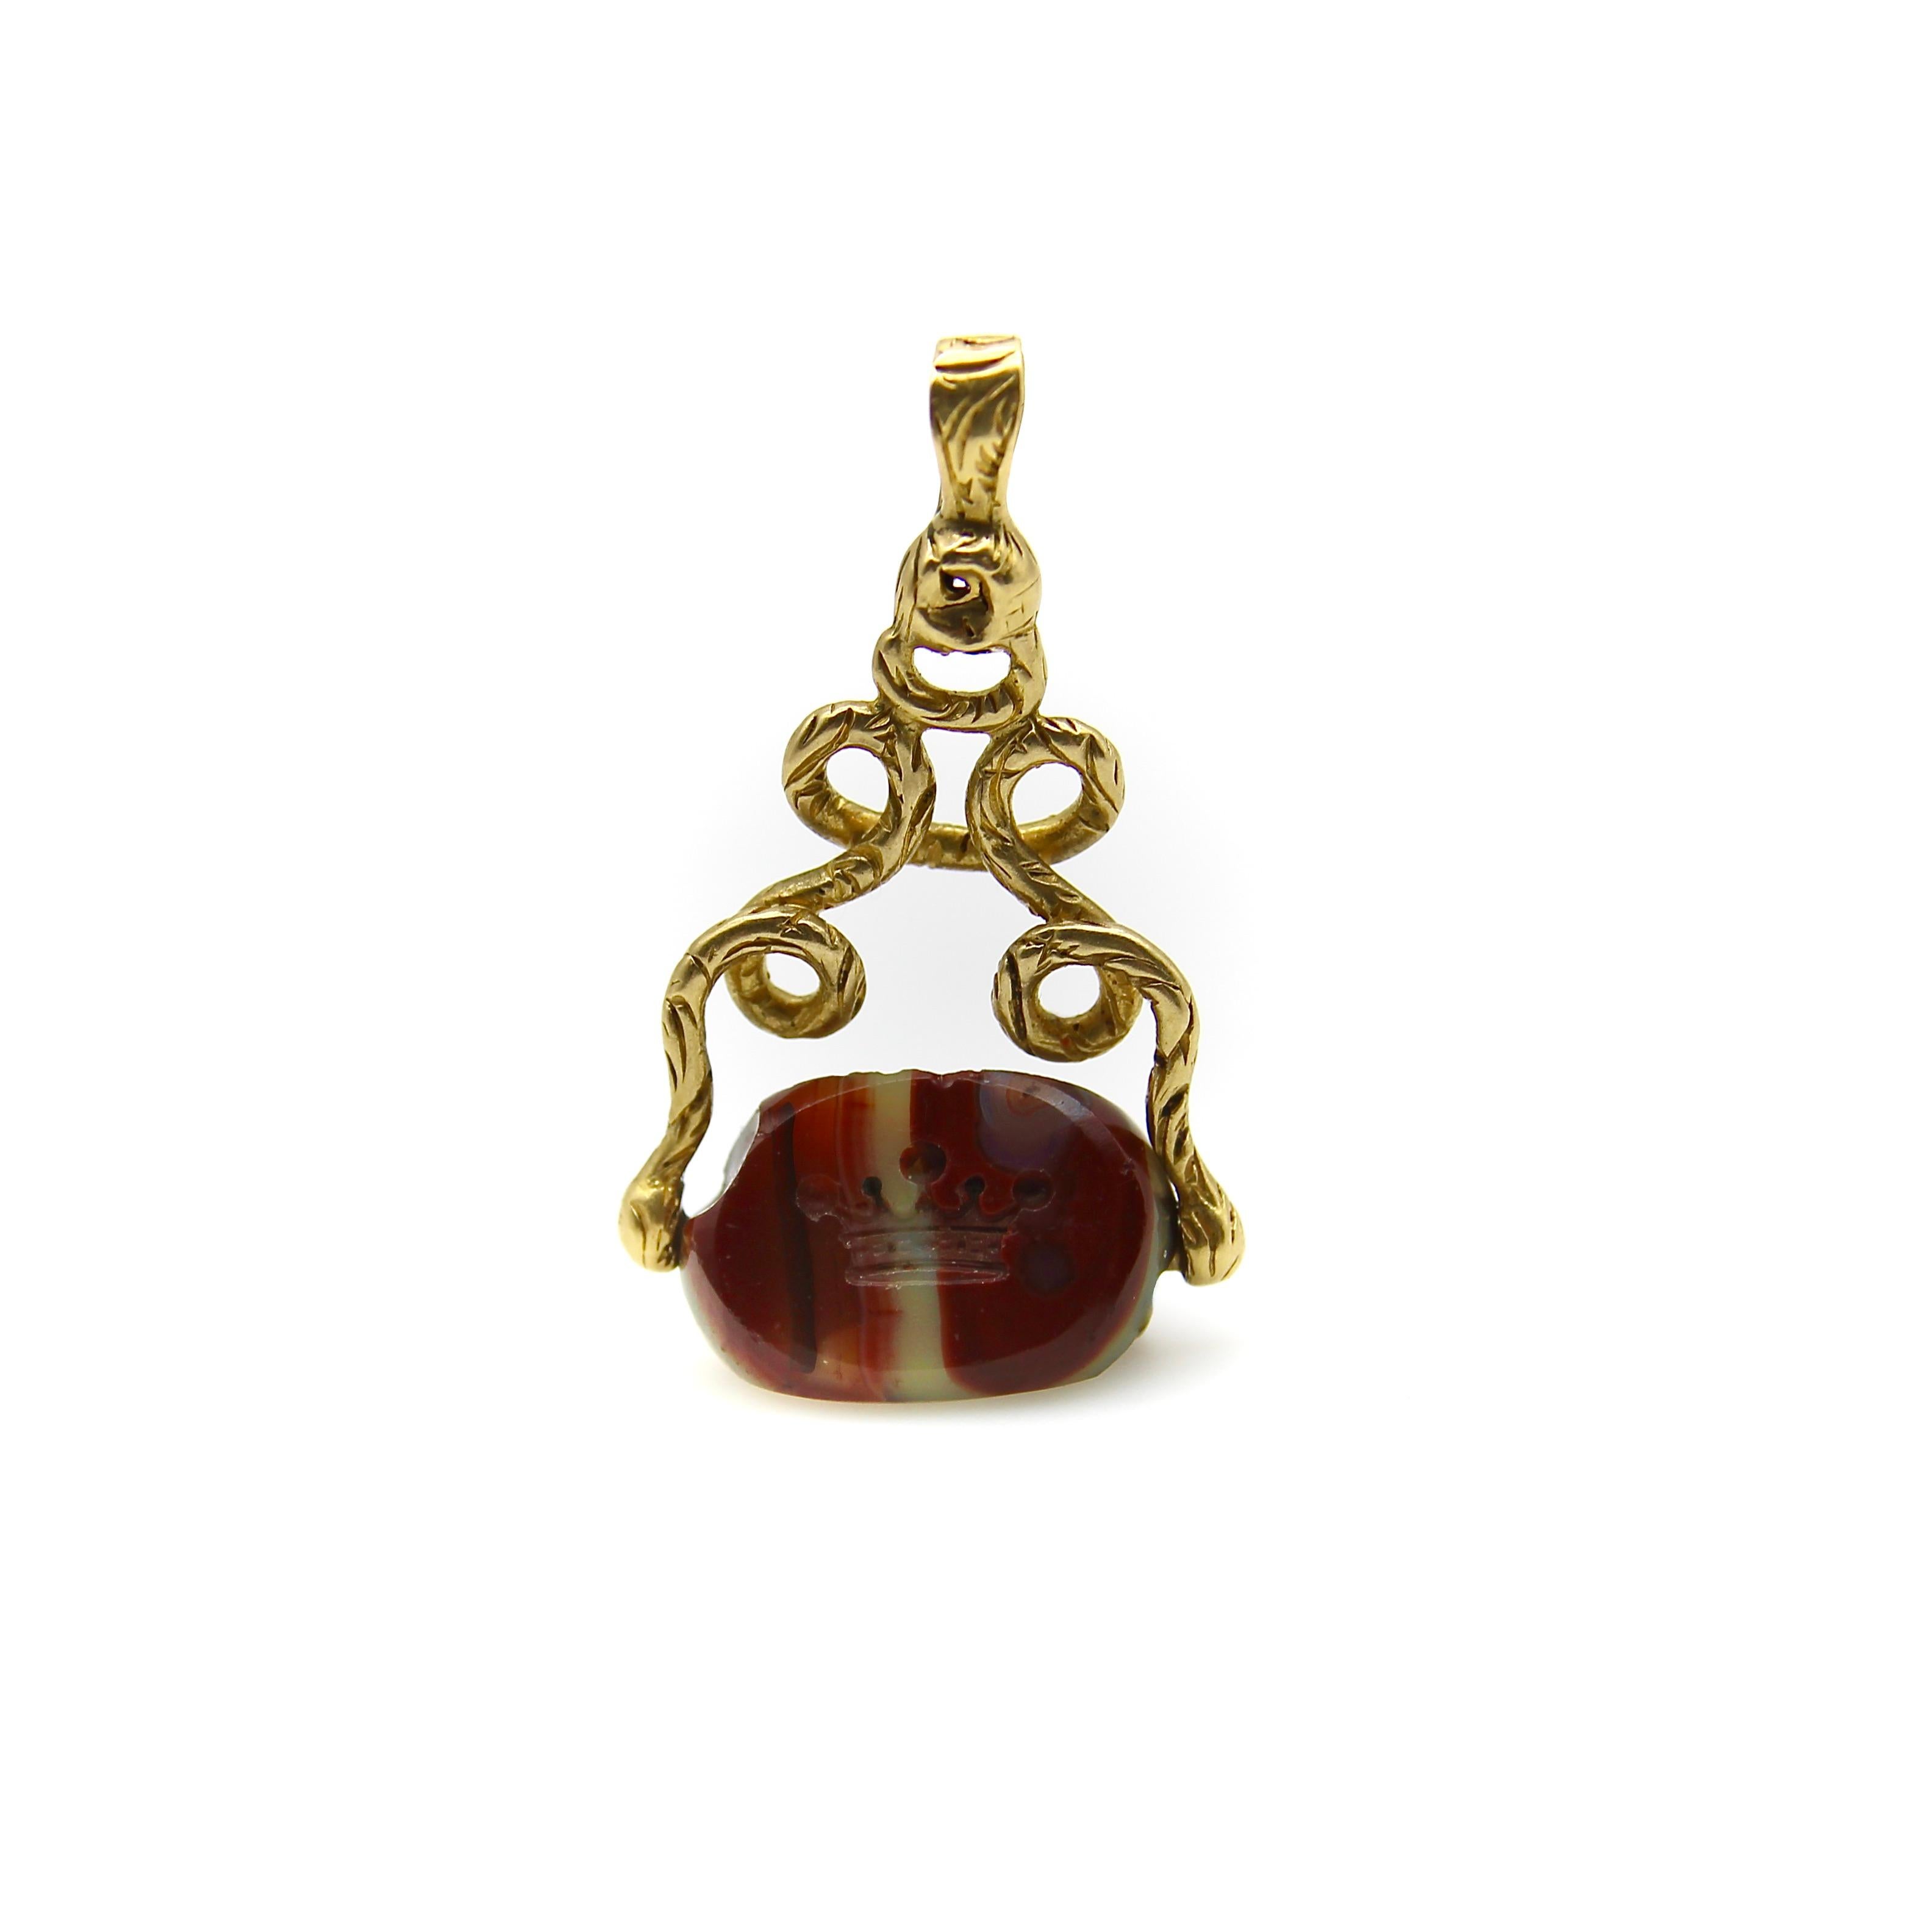 Circa 1800, this incredible Georgian fob is an antique treasure over two centuries old. The three-sided triangular fob is made of banded agate carved with a five-point crown used as a wax seal. The agate is a hue of deep, earthy red marbled with